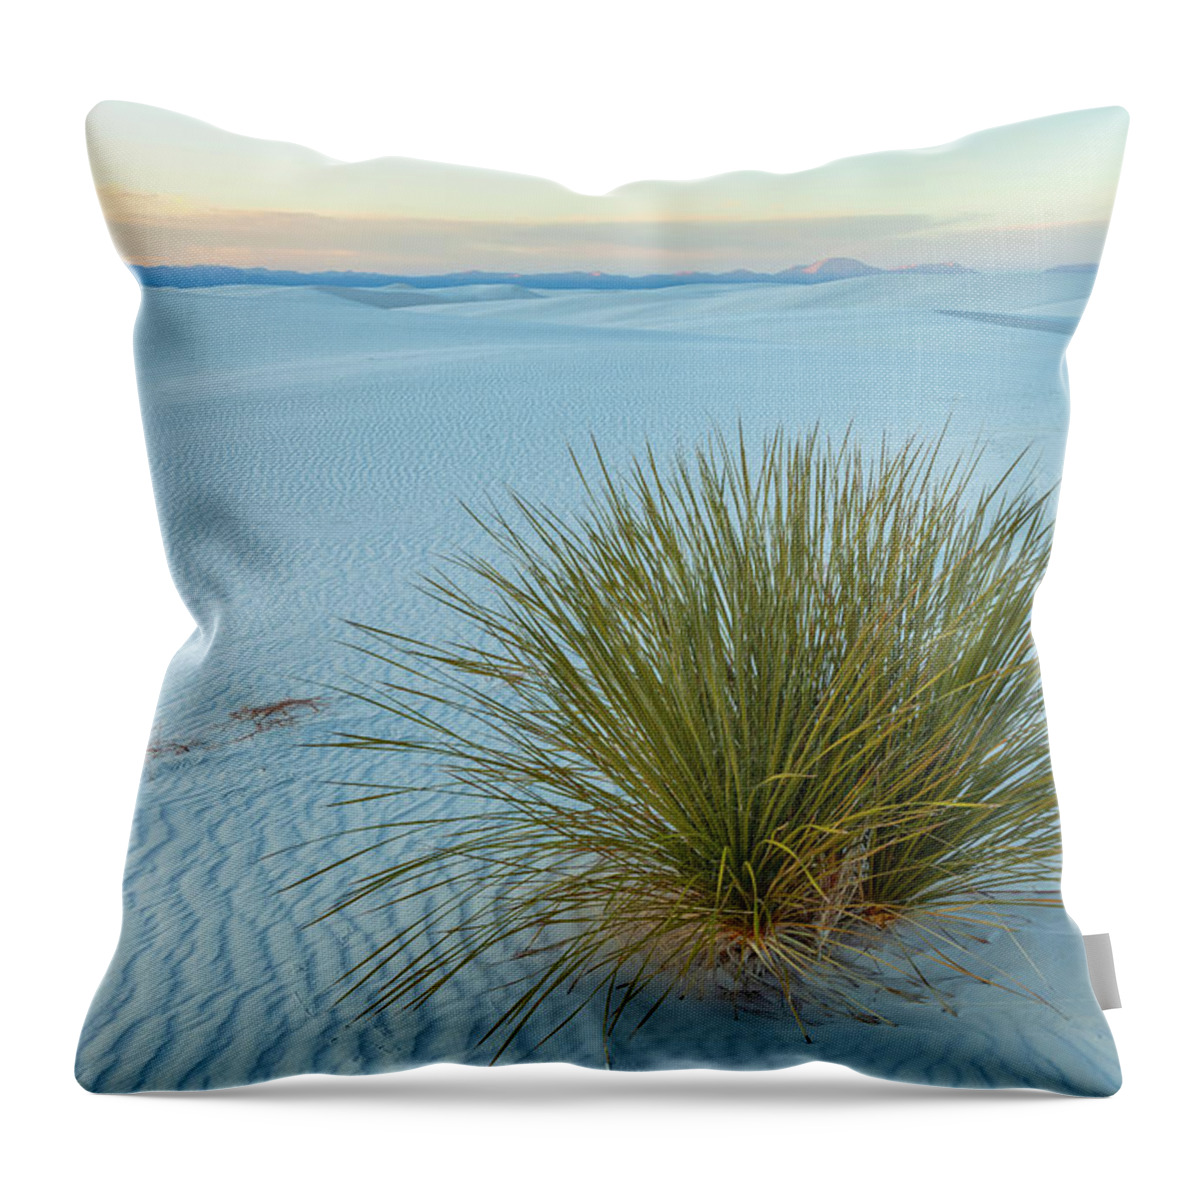 Sand Dunes Throw Pillow featuring the photograph Alone In Desert by Jonathan Nguyen